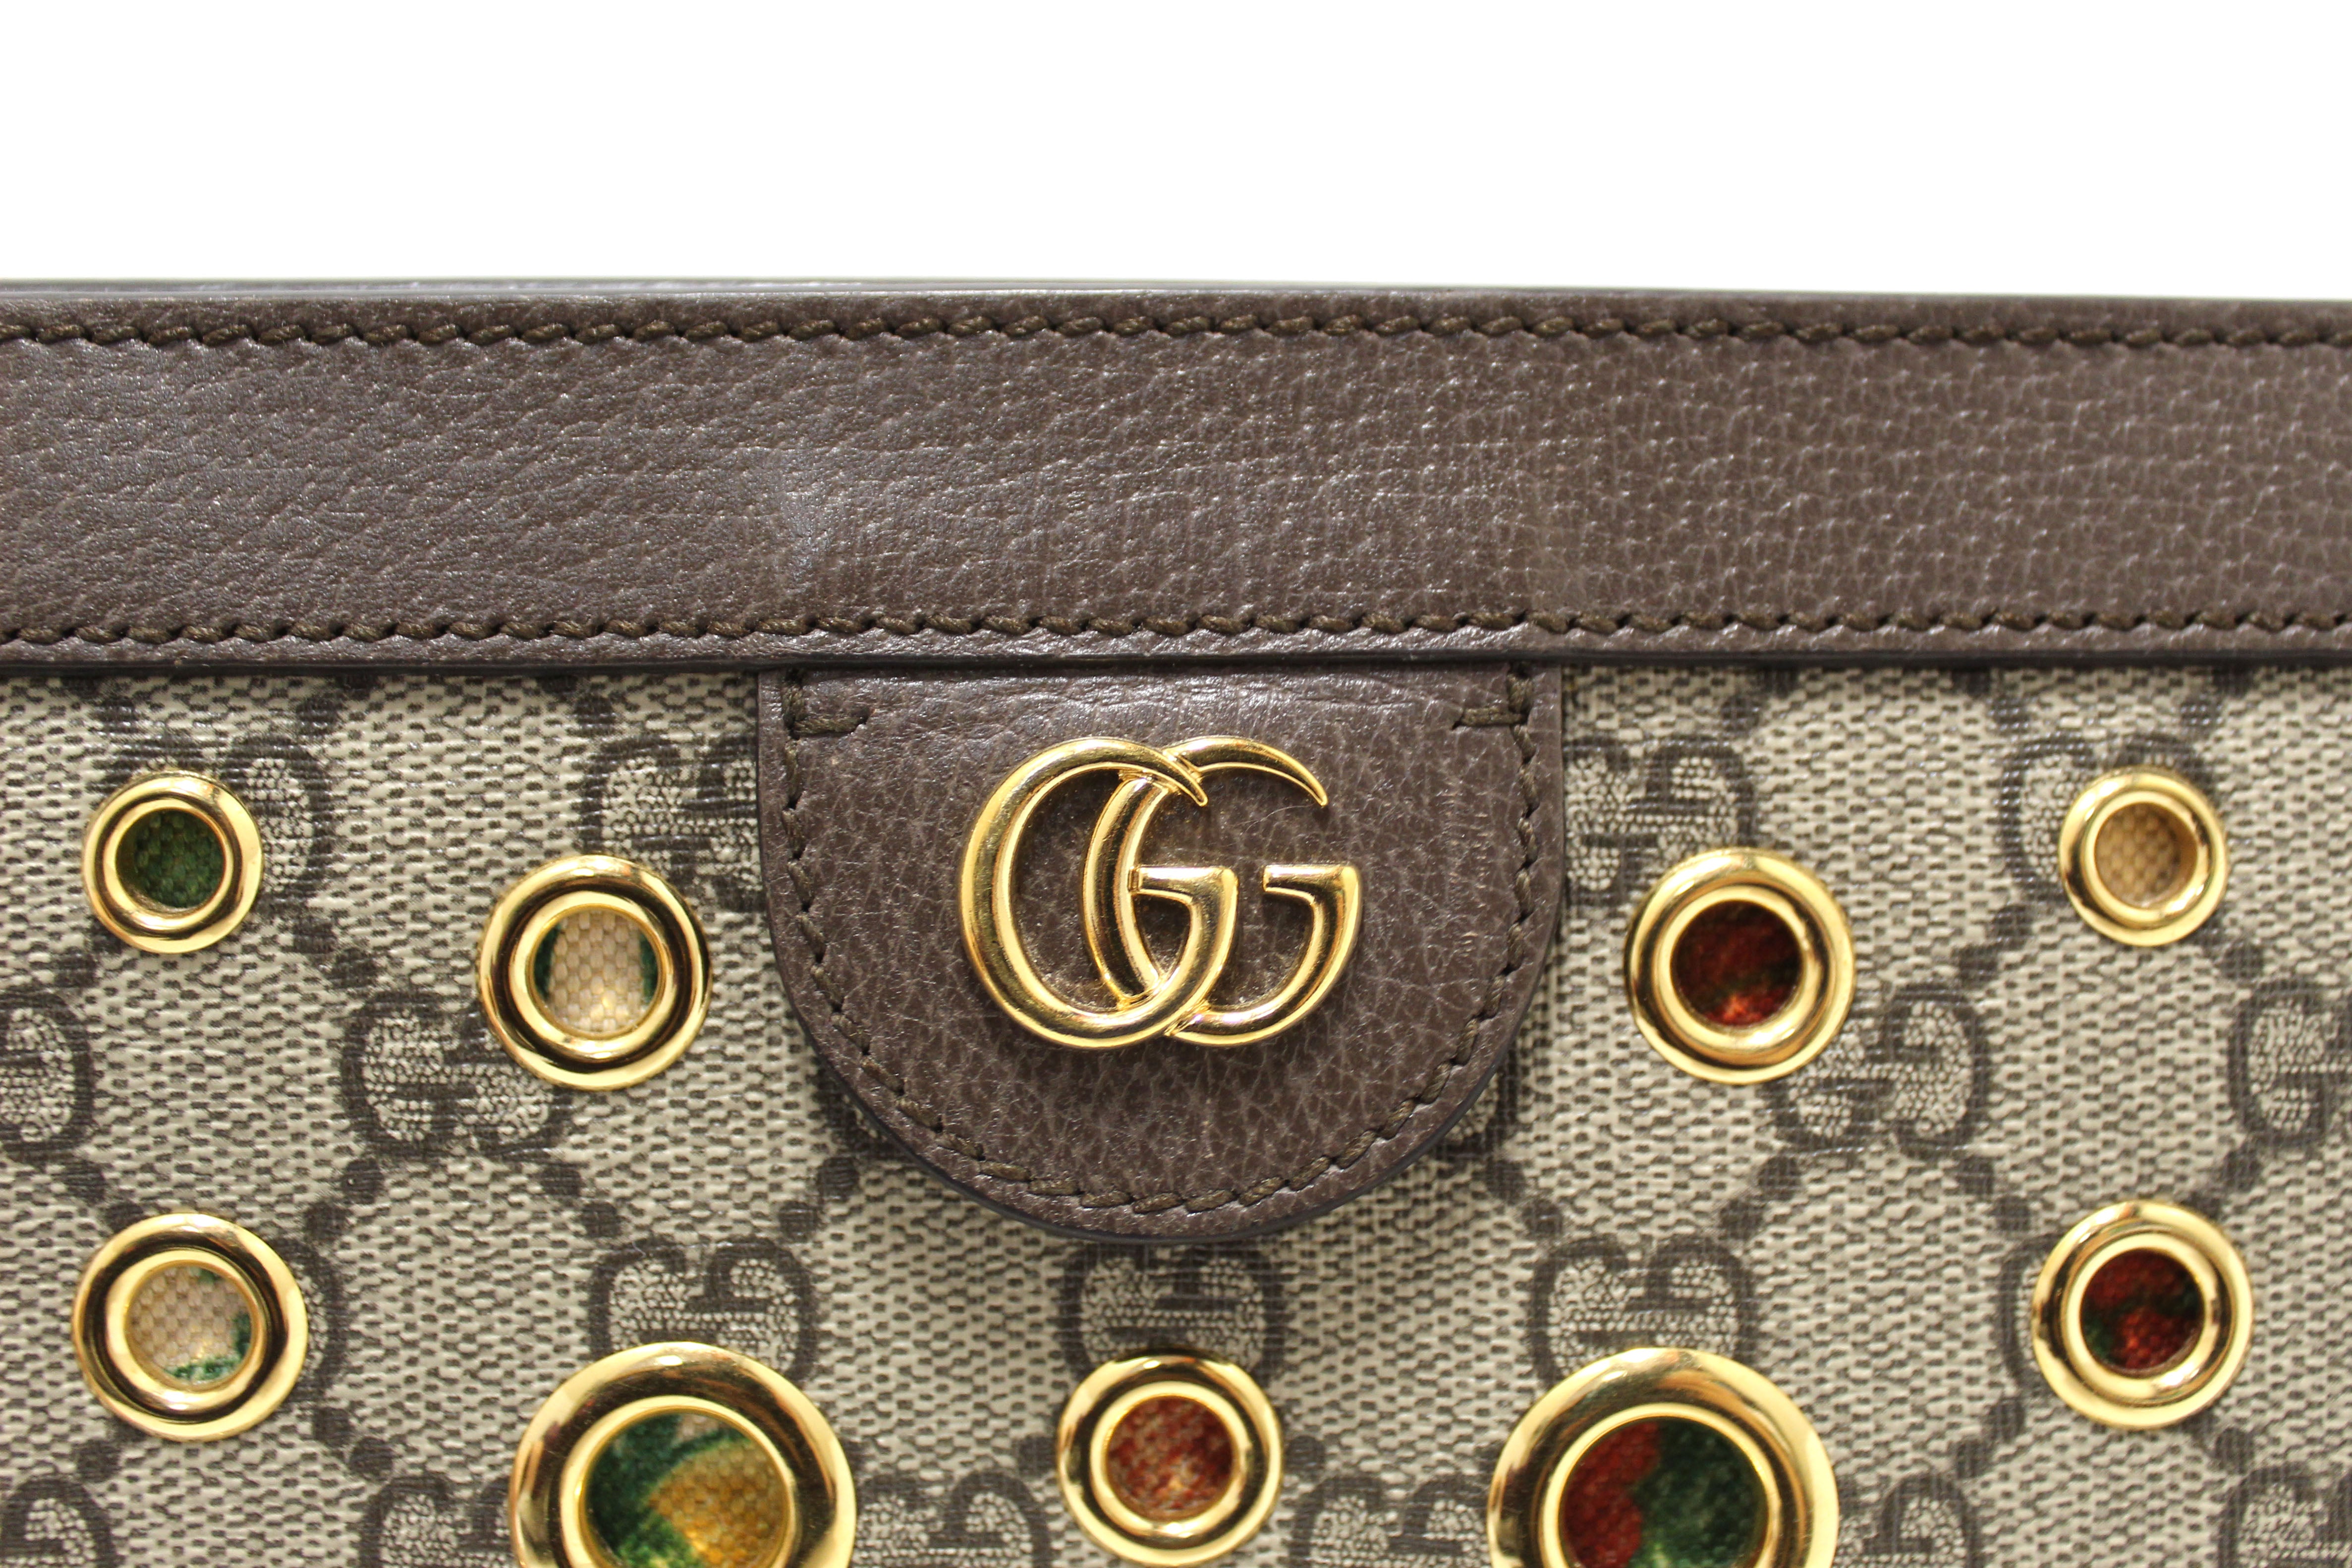 Authentic Gucci GG Supreme Eyelet Ophidia Small Chain Shoulder Bag